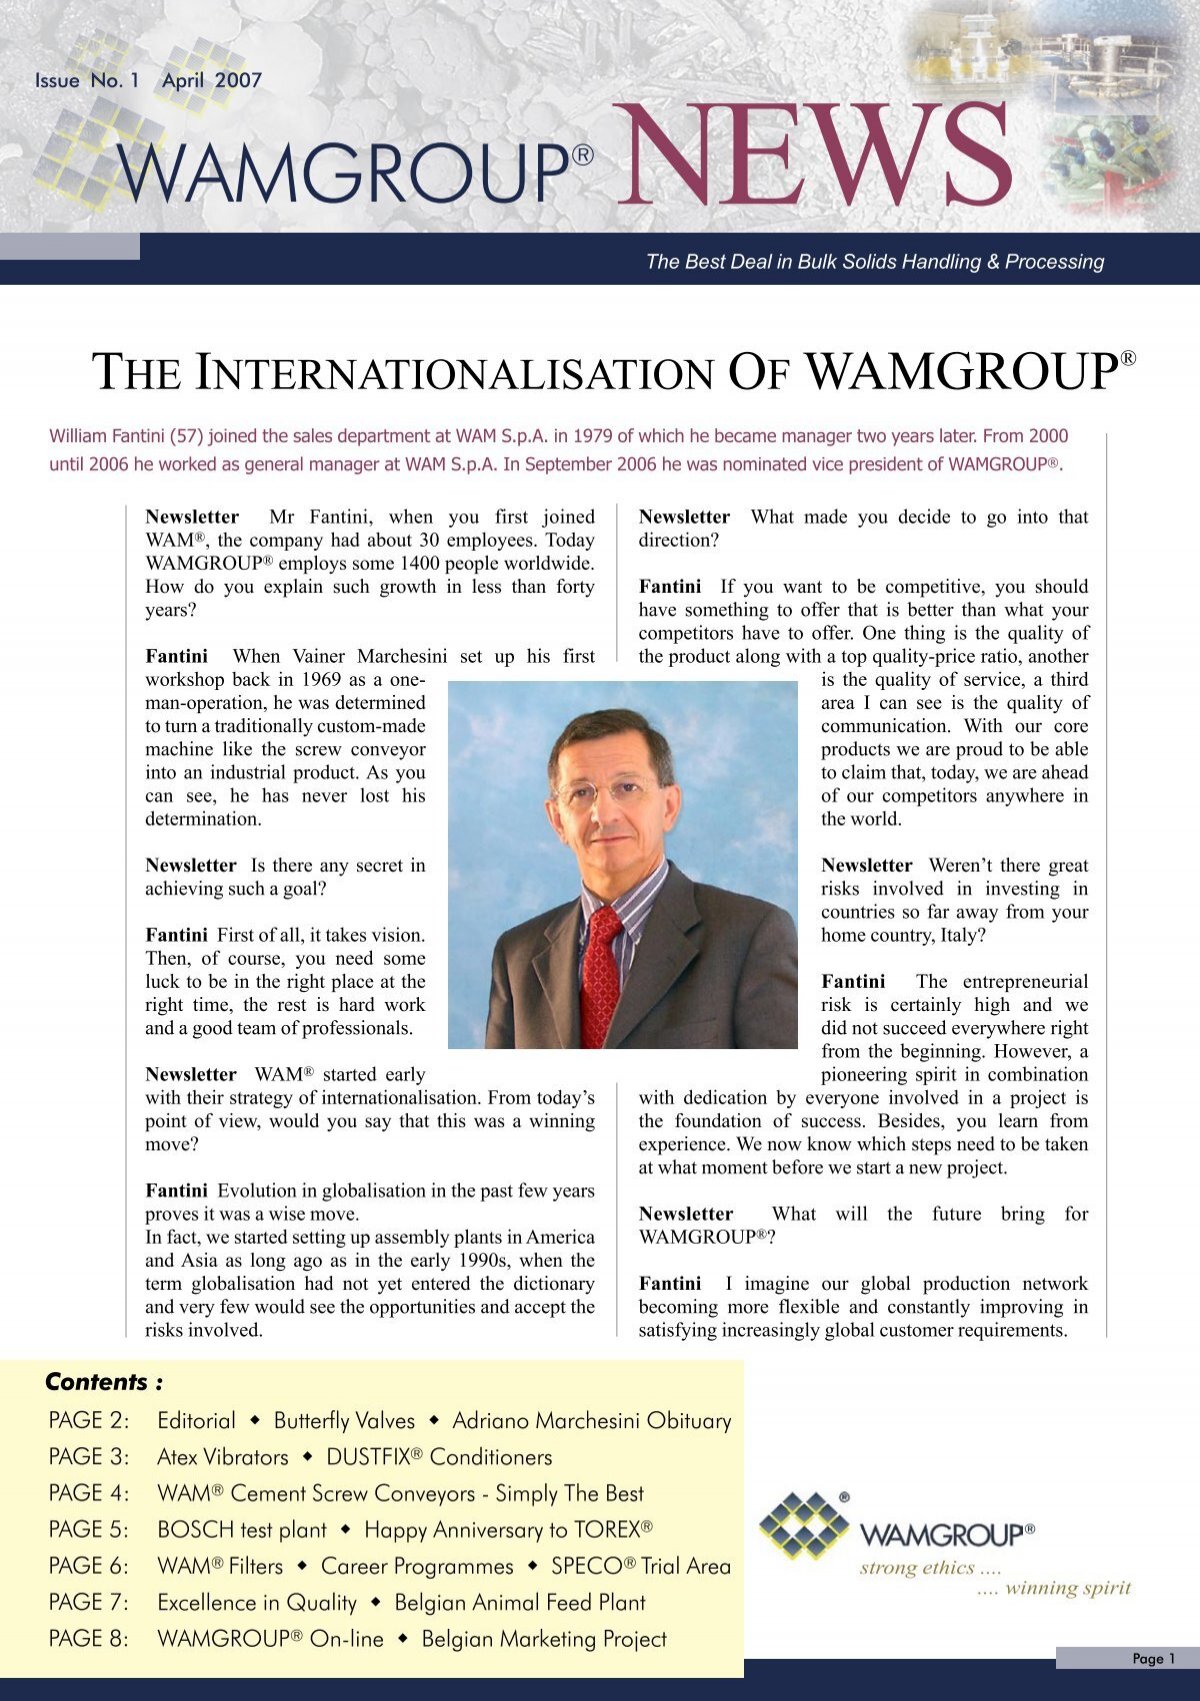 WAMGROUP news_1.indd